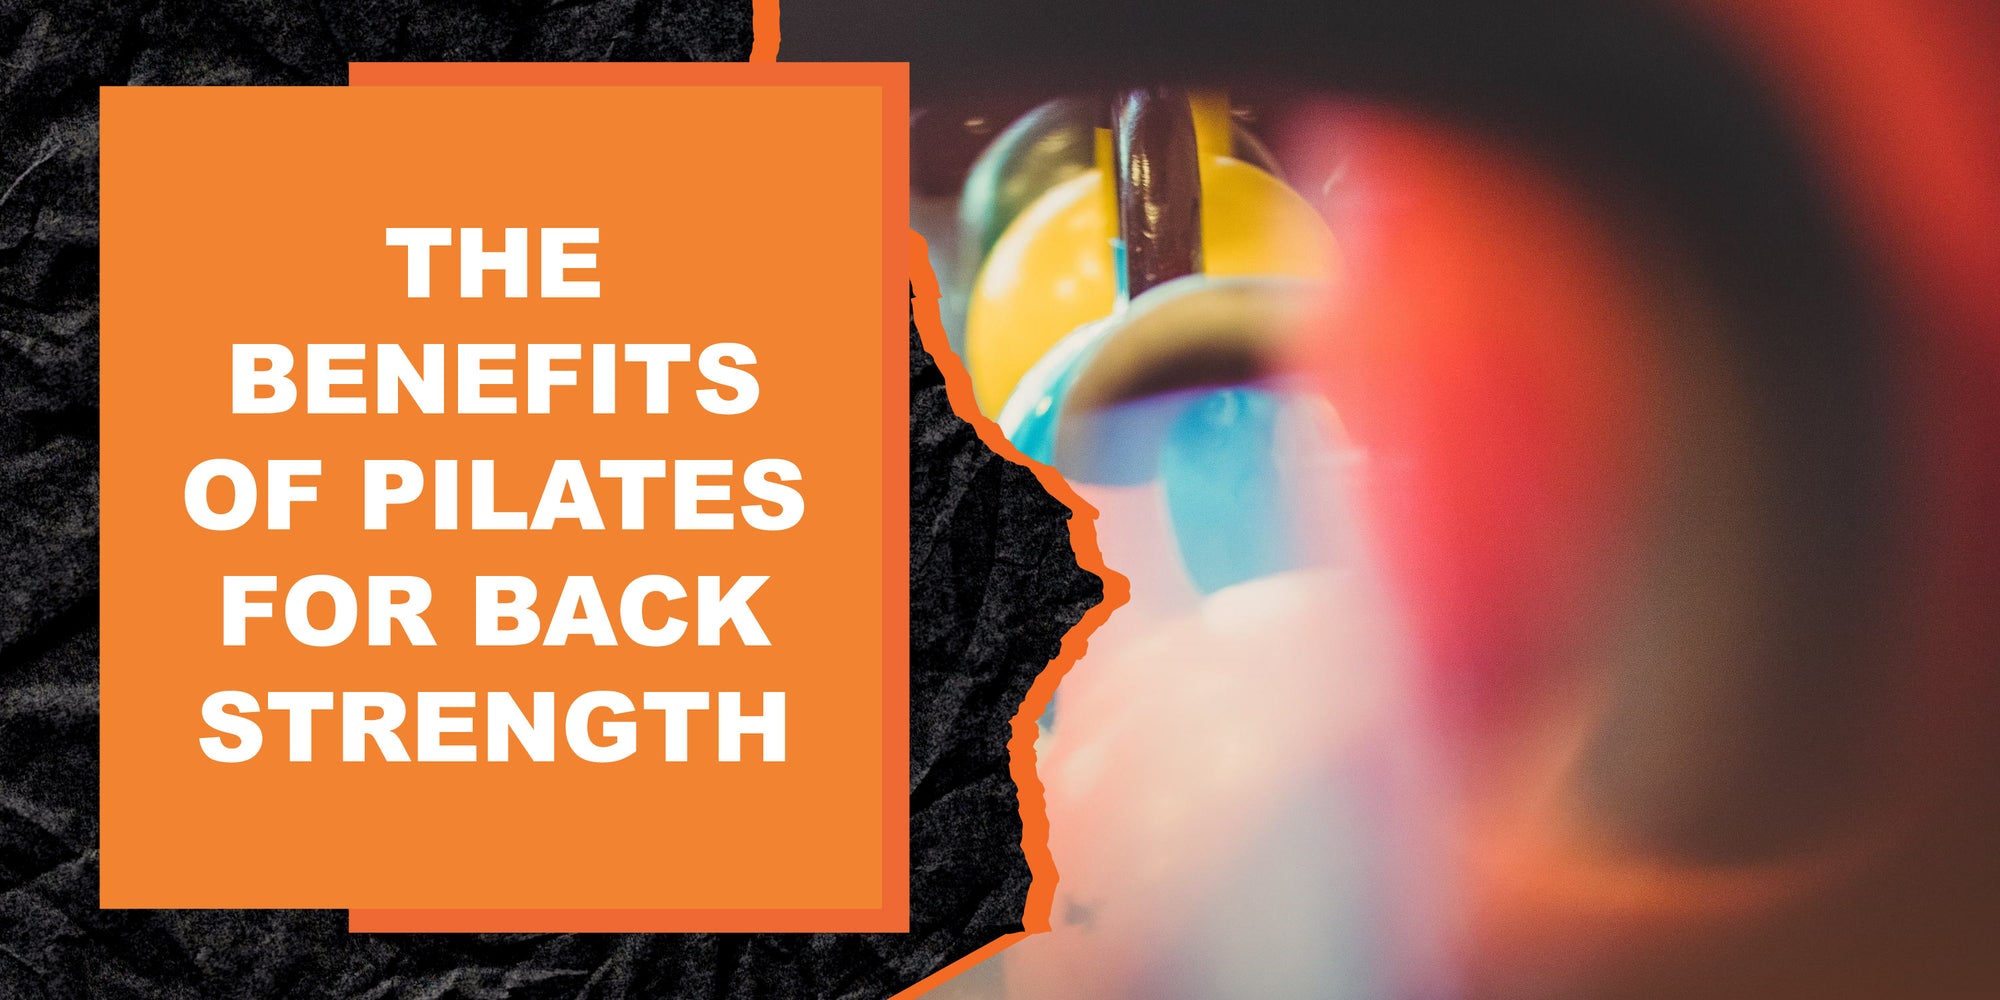 The Benefits of Pilates for Back Strength